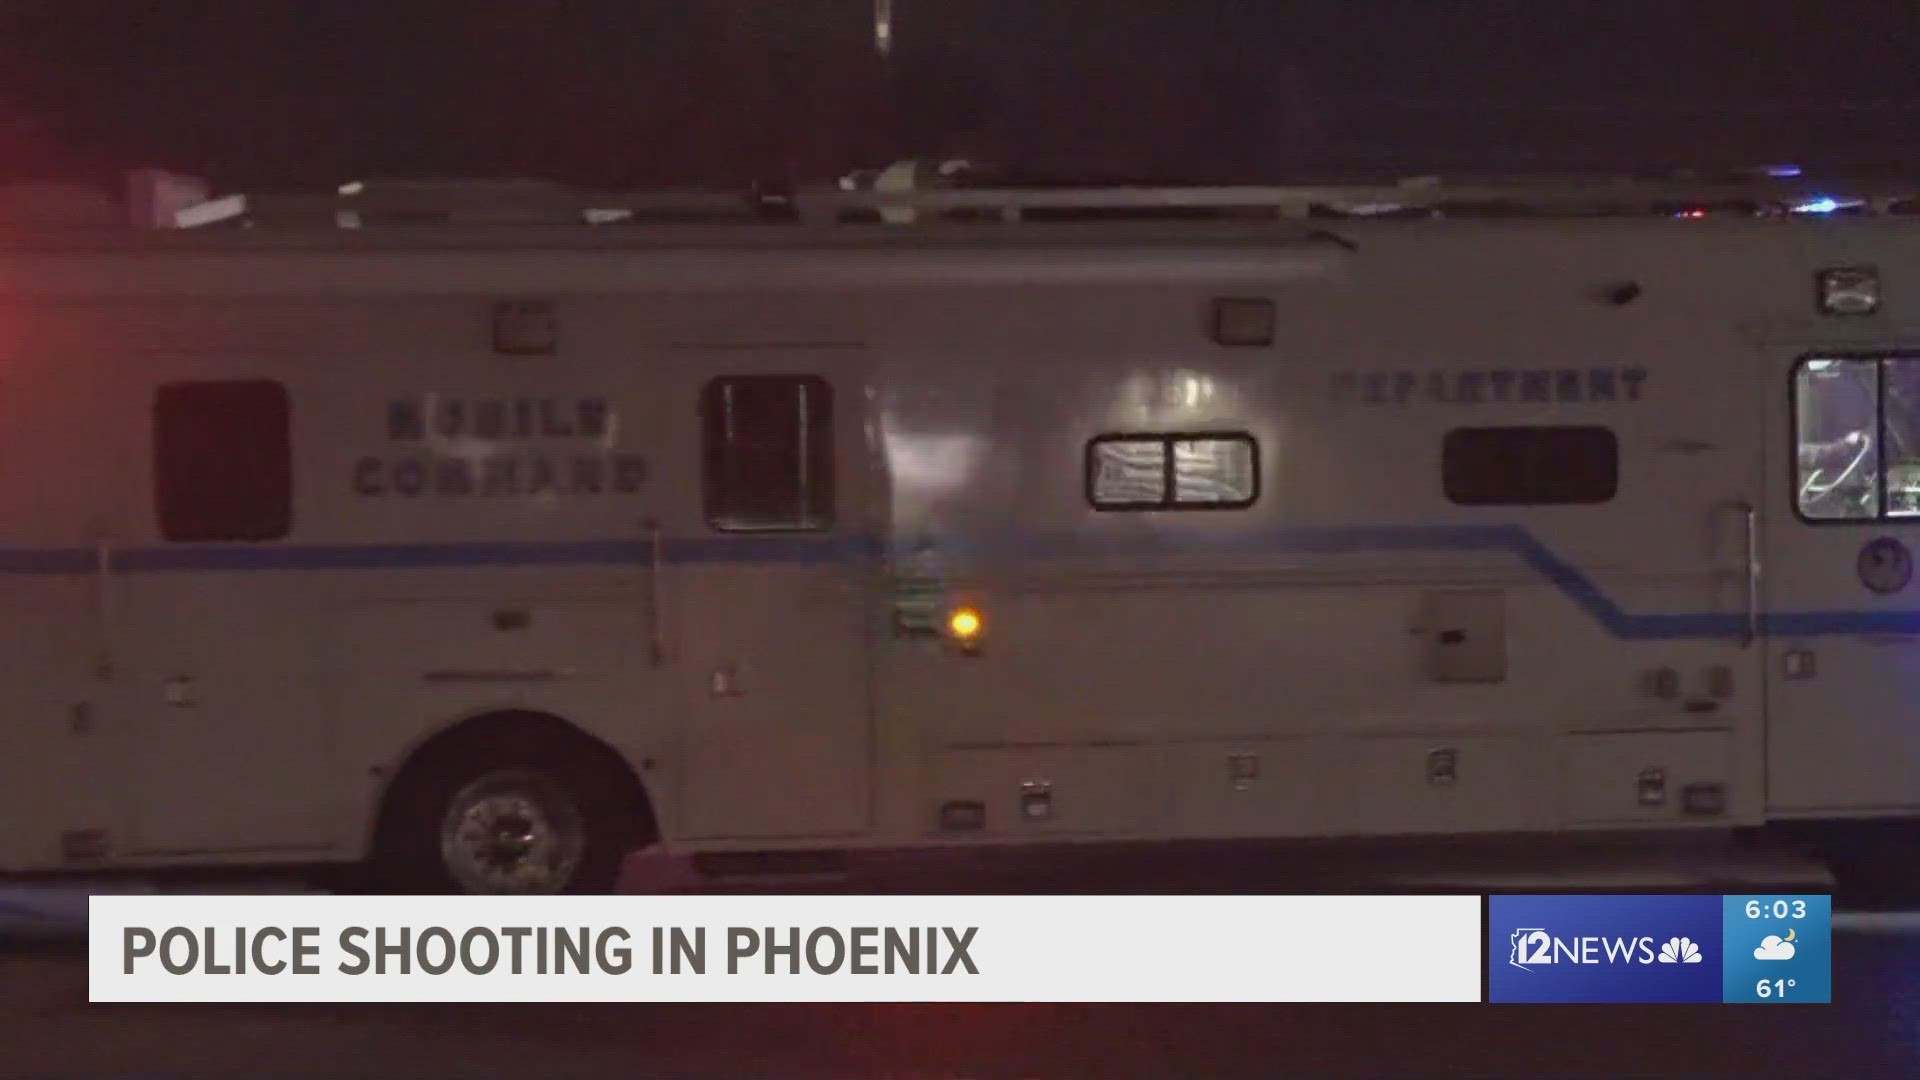 Phoenix Police shot and ran over a man after being a domestic violence call Friday night. However, that man was the not the suspect. Full details in the video above.